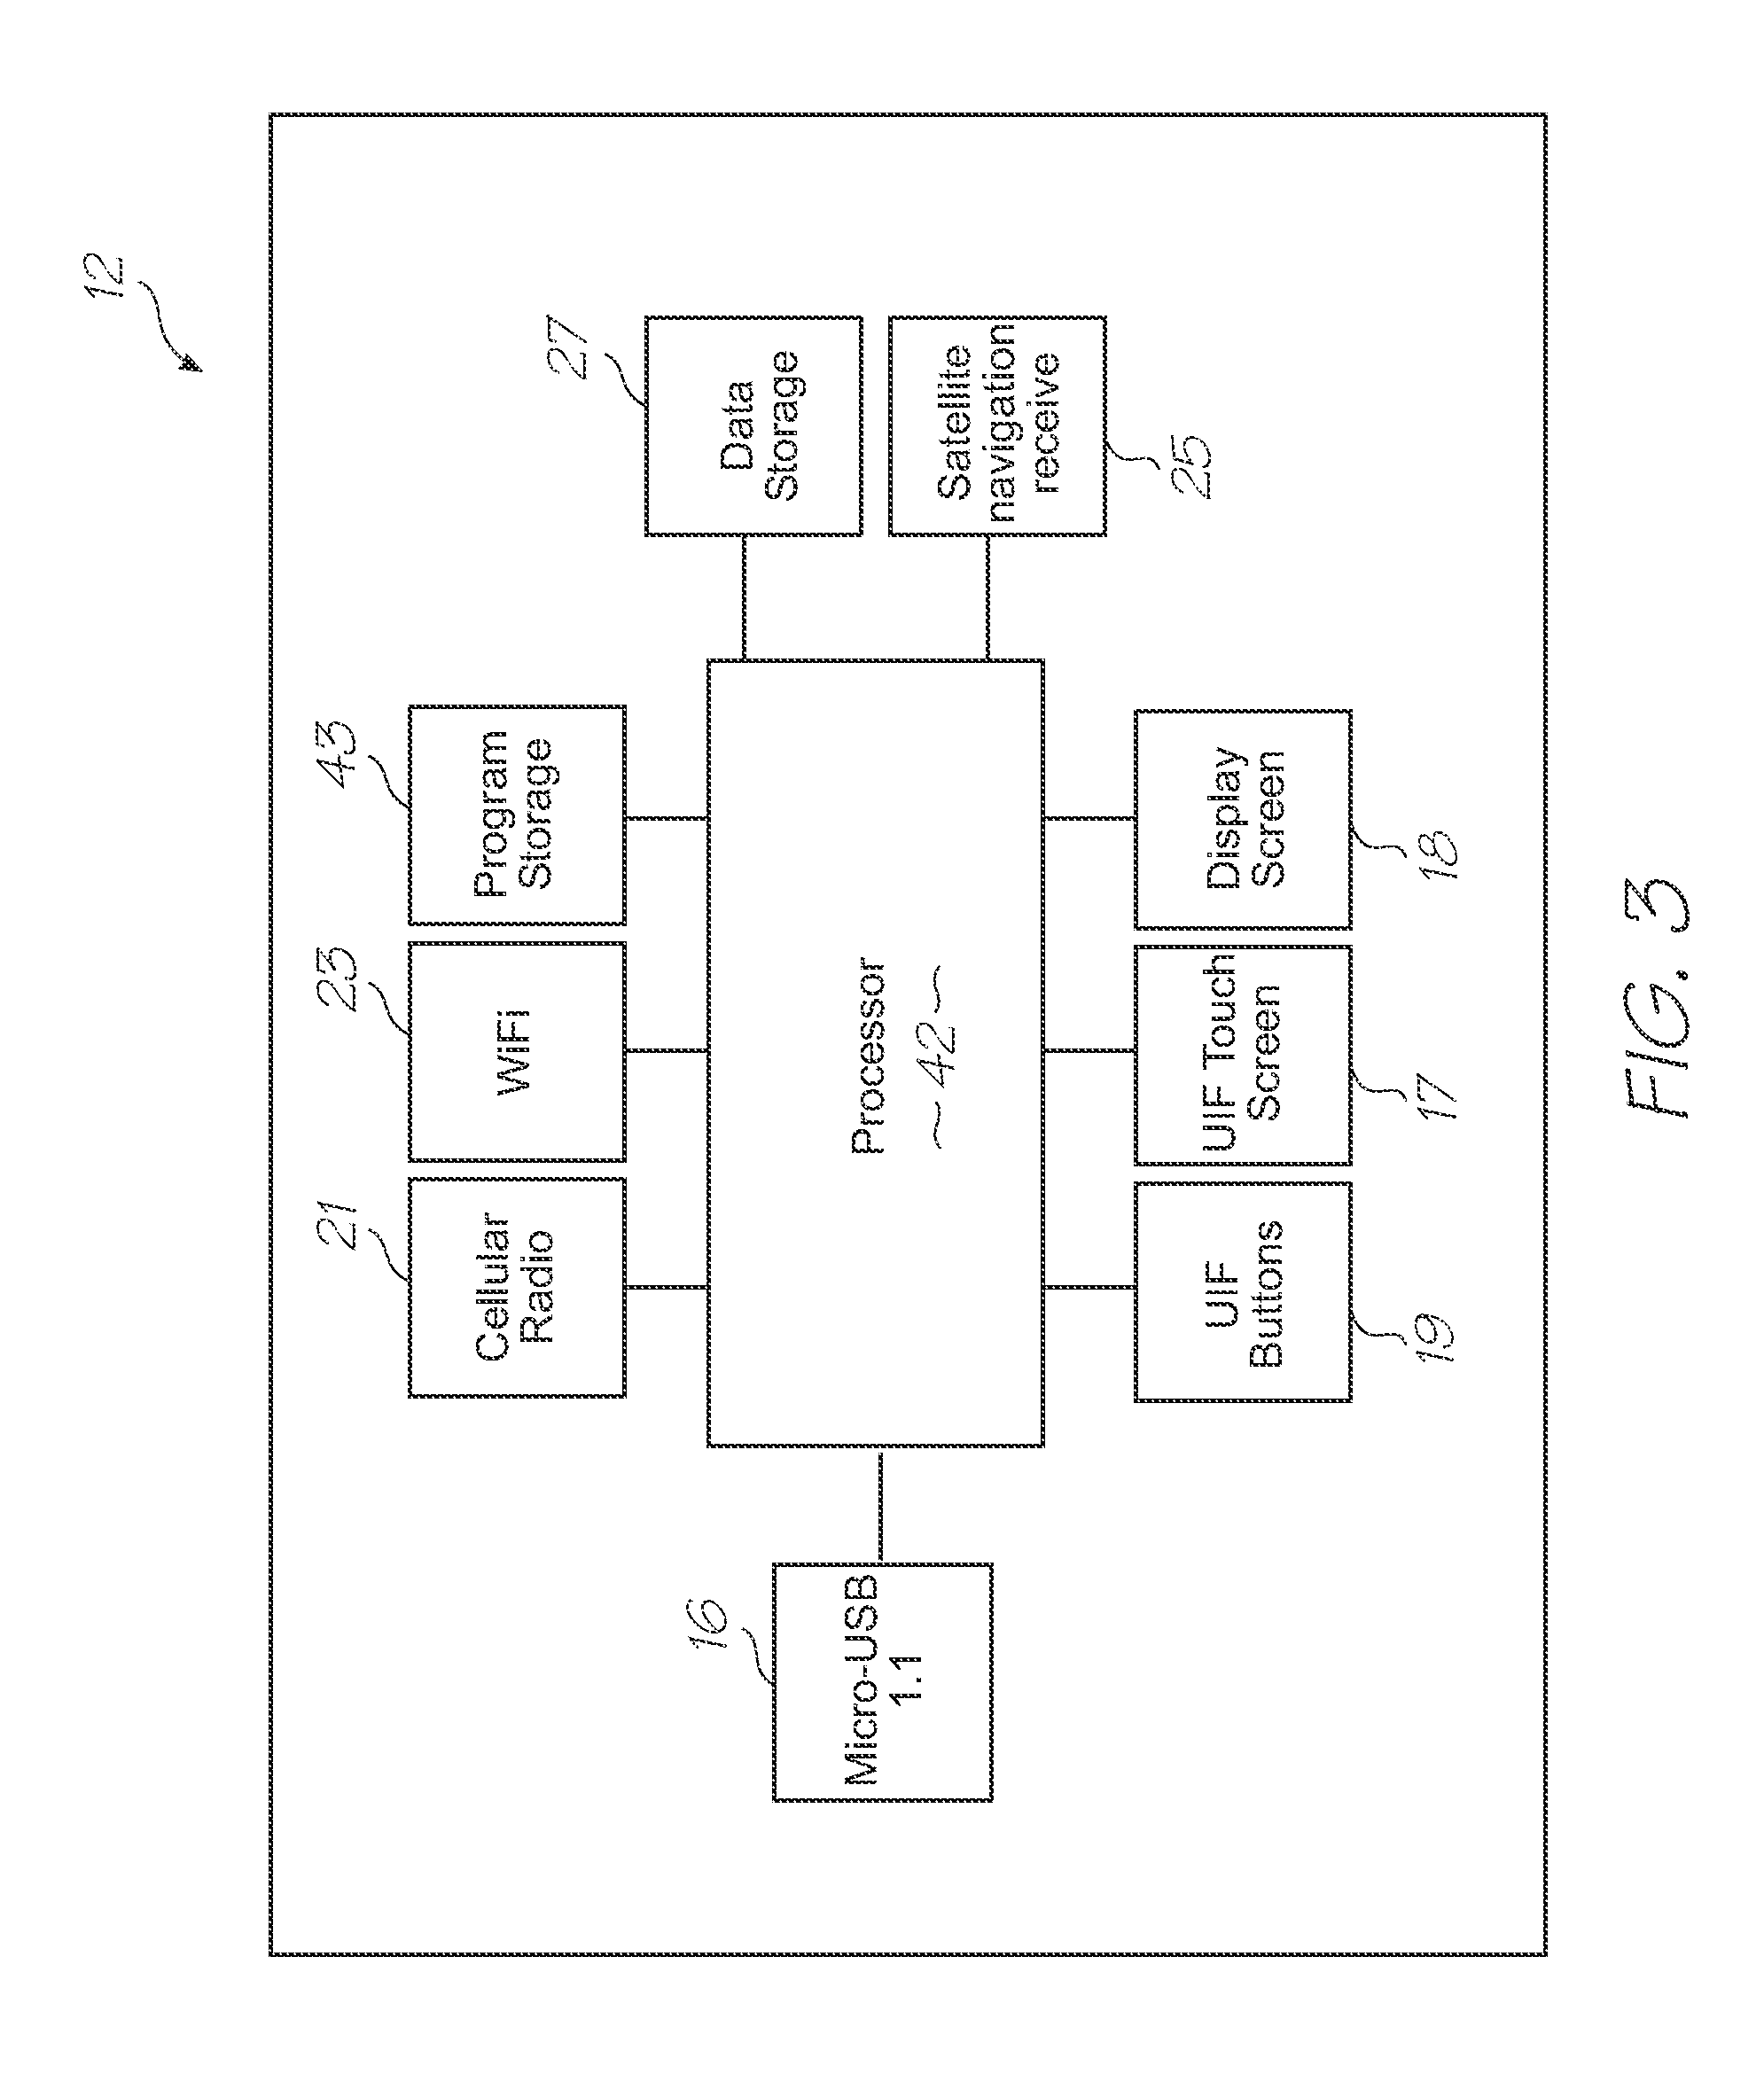 Loc device for amplifying and detecting target nucleic acid sequences using electrochemiluminescent resonant energy transfer, stem-and-loop probes with covalently attached primers